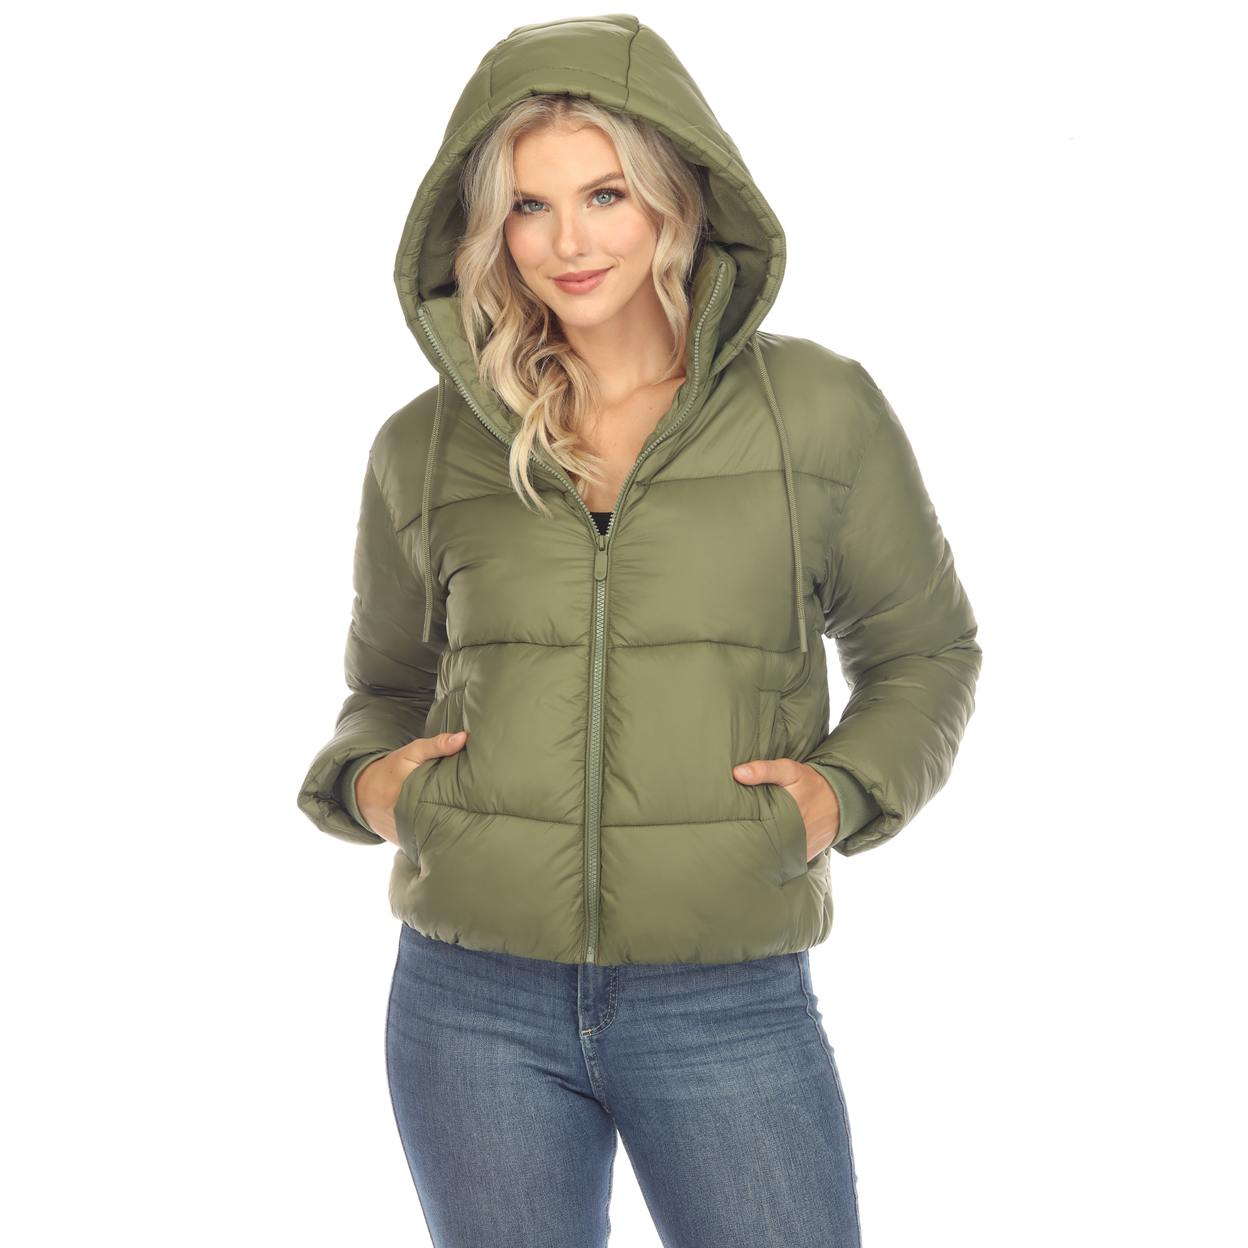 White Mark Women's Zip Hooded Puffer Jacket With Pockets - Olive, Large